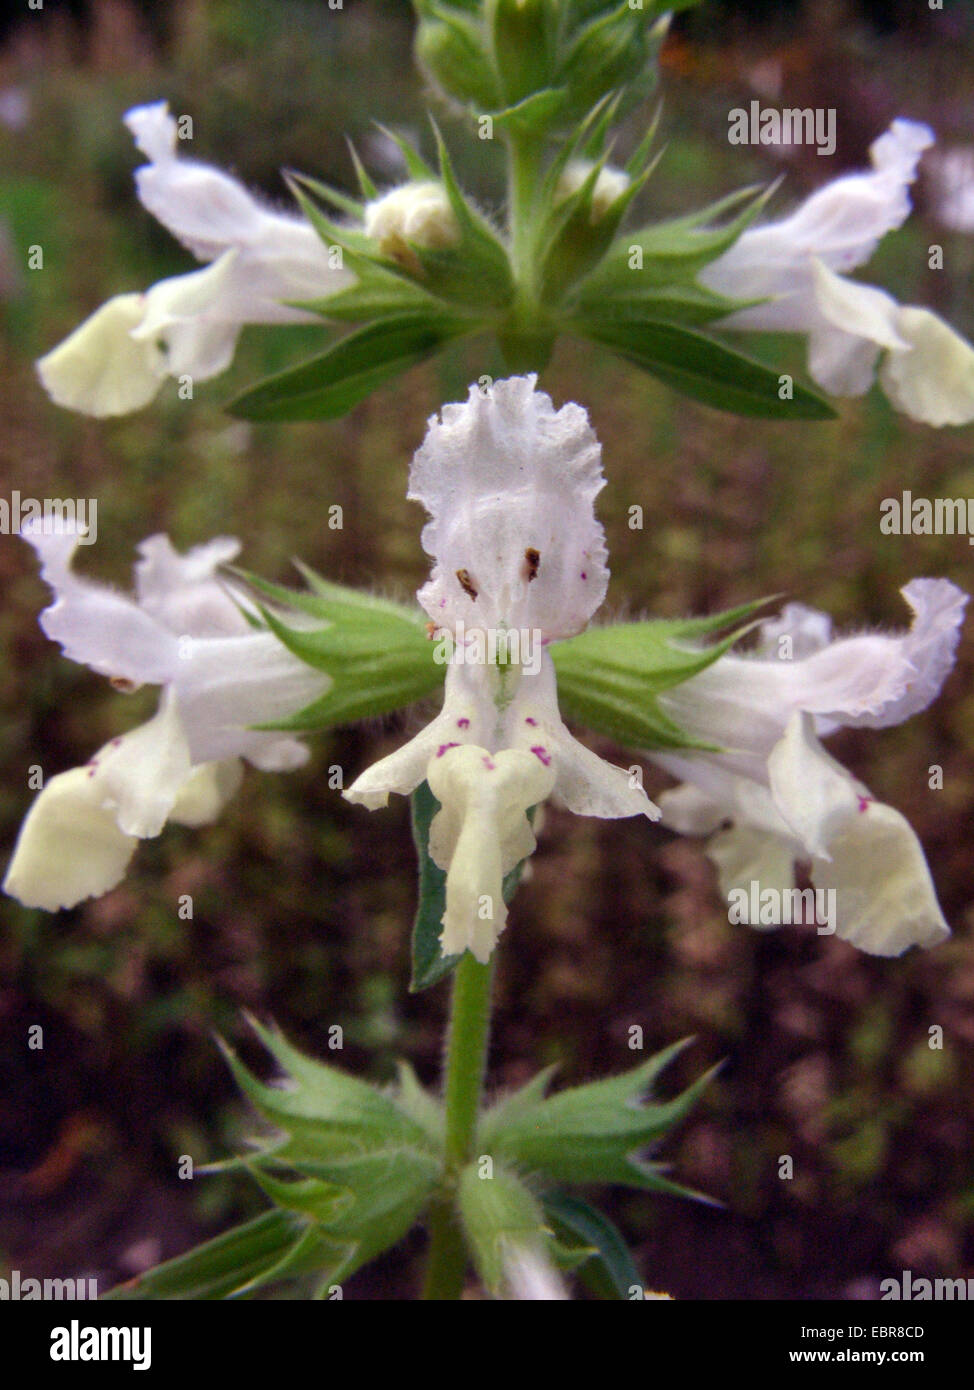 annual yellow-woundwort, hedgenettle betony (Stachys annua), flowers, Germany Stock Photo